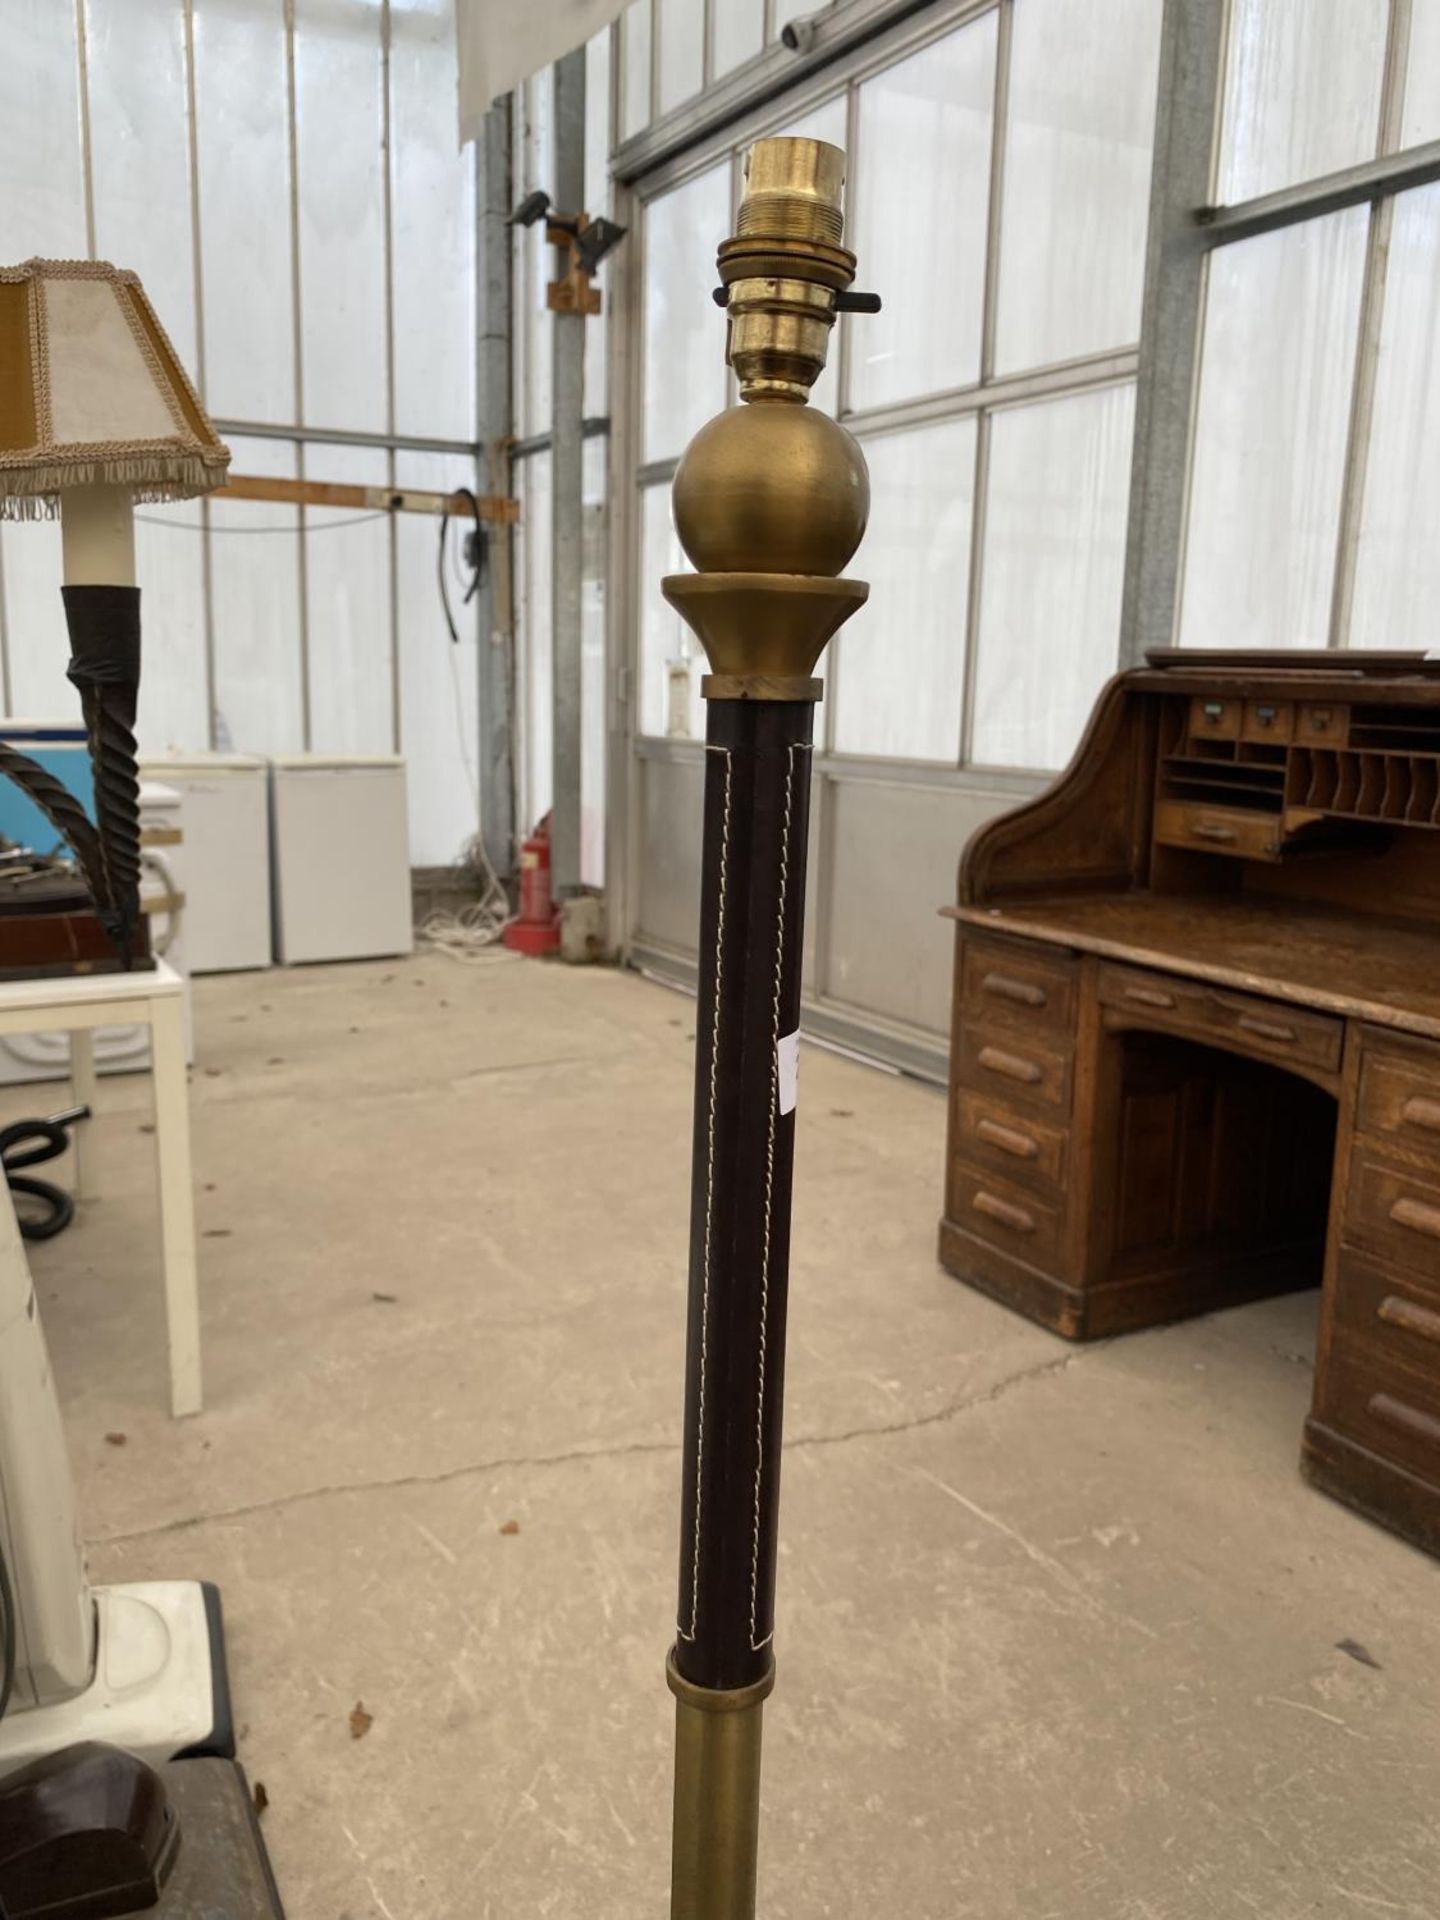 A HEAVY METAL STANDARD LAMP - Image 3 of 3